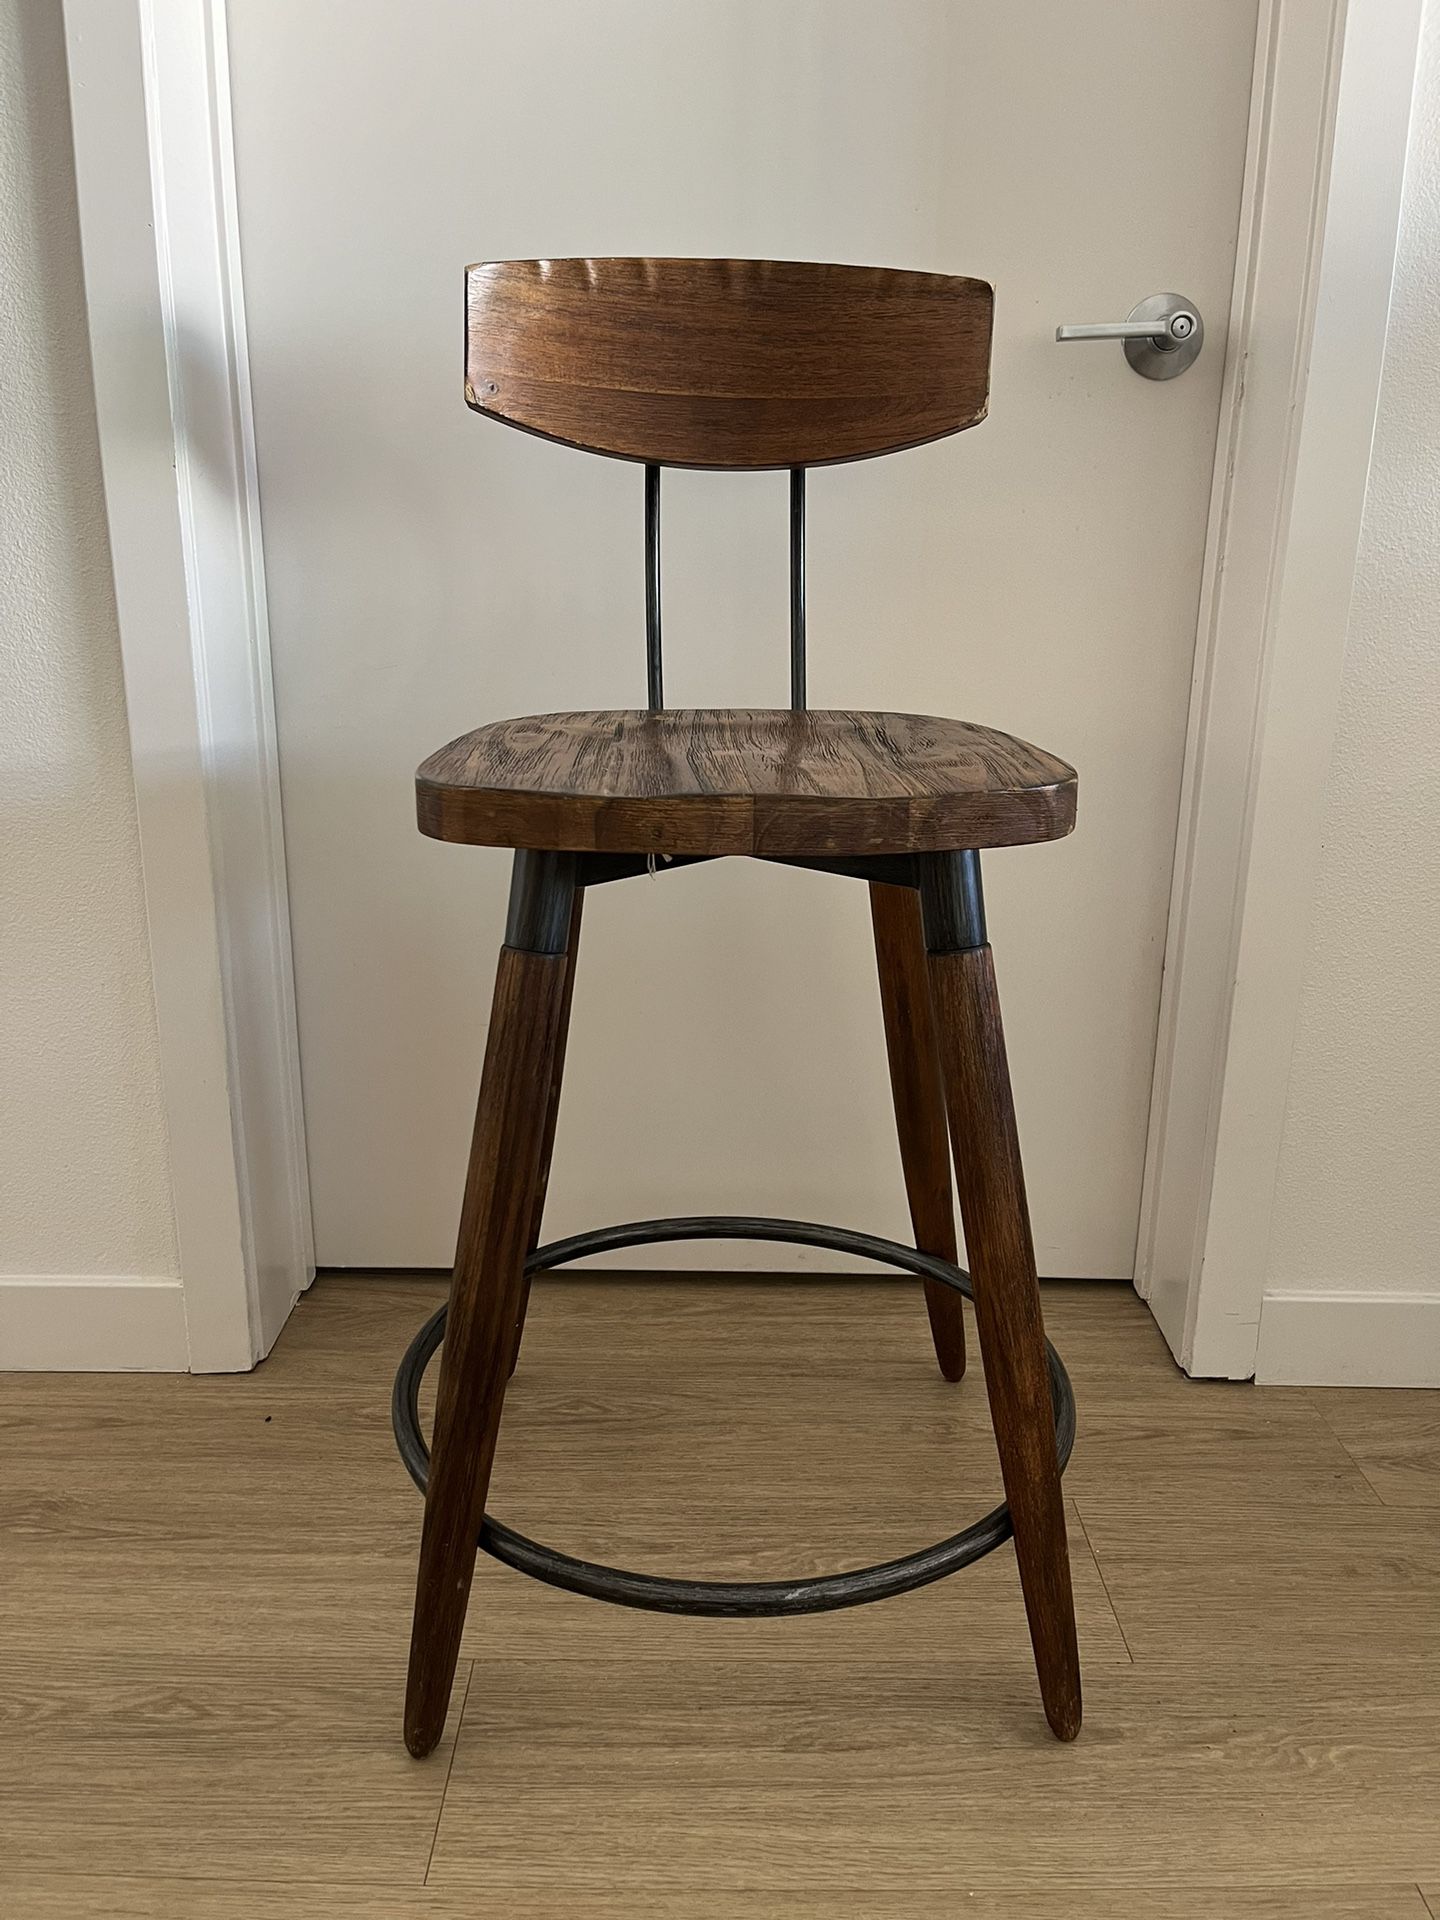  Wooden Bar Stool With Gunmetal Accents